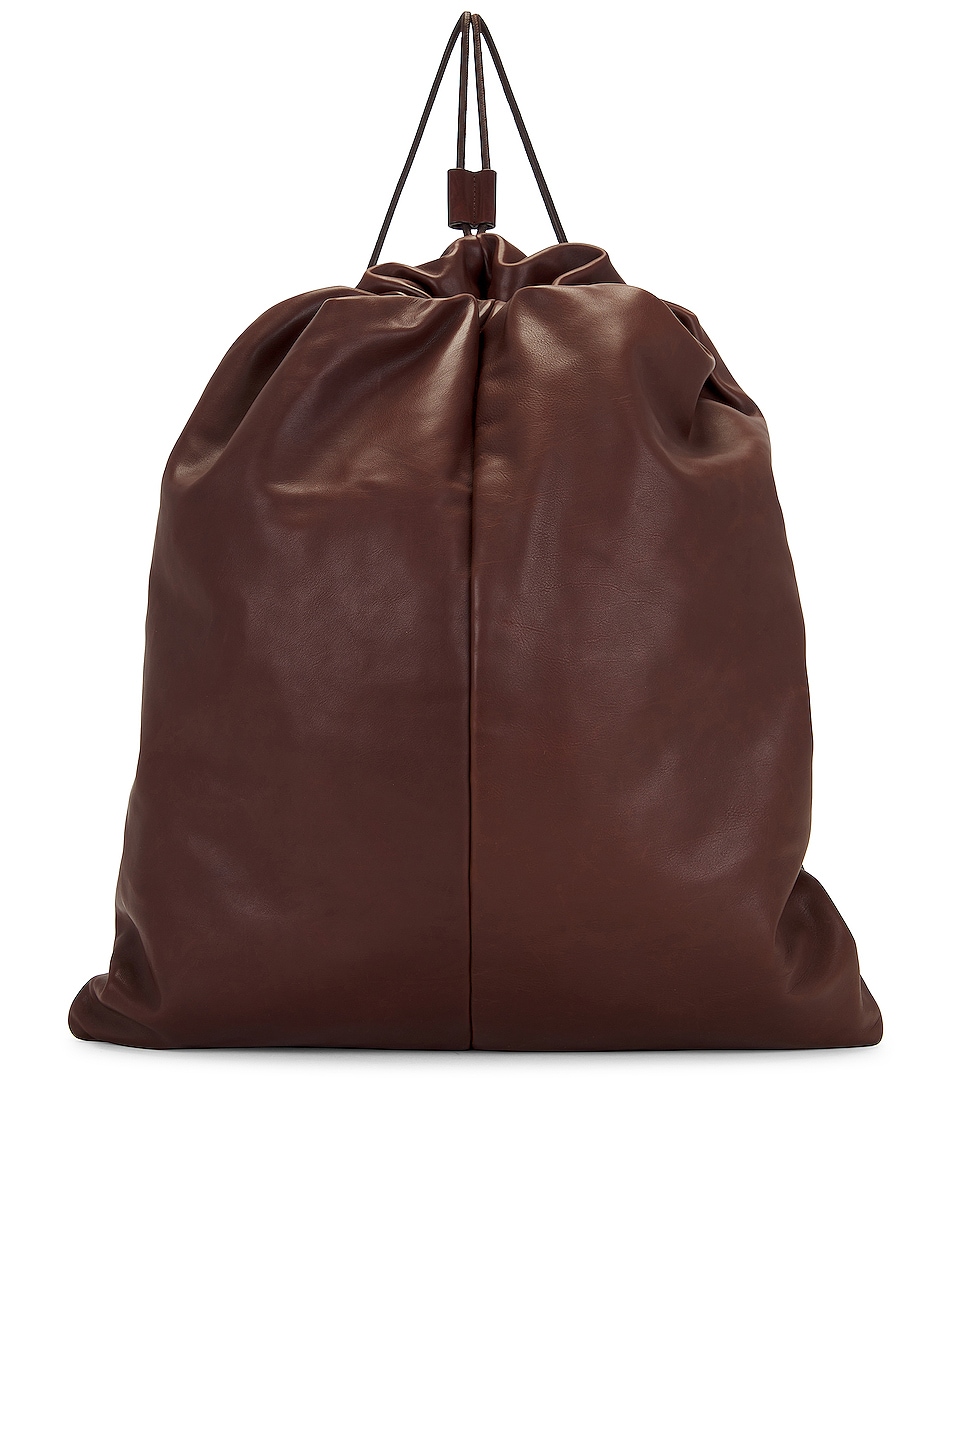 Puffy Backpack in Chocolate